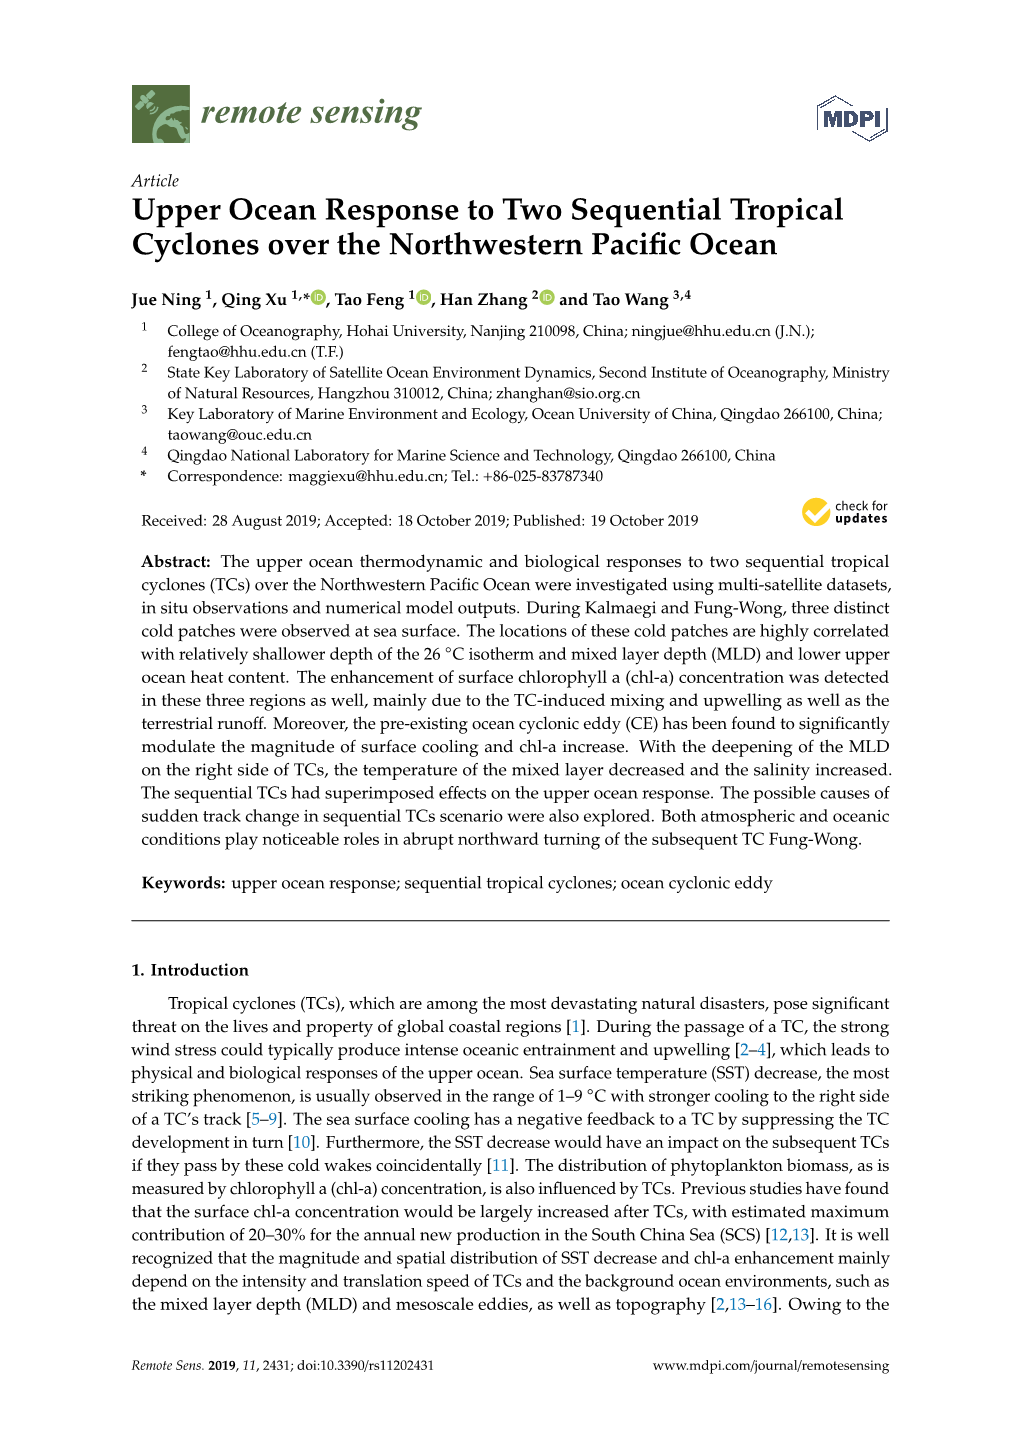 Upper Ocean Response to Two Sequential Tropical Cyclones Over the Northwestern Paciﬁc Ocean